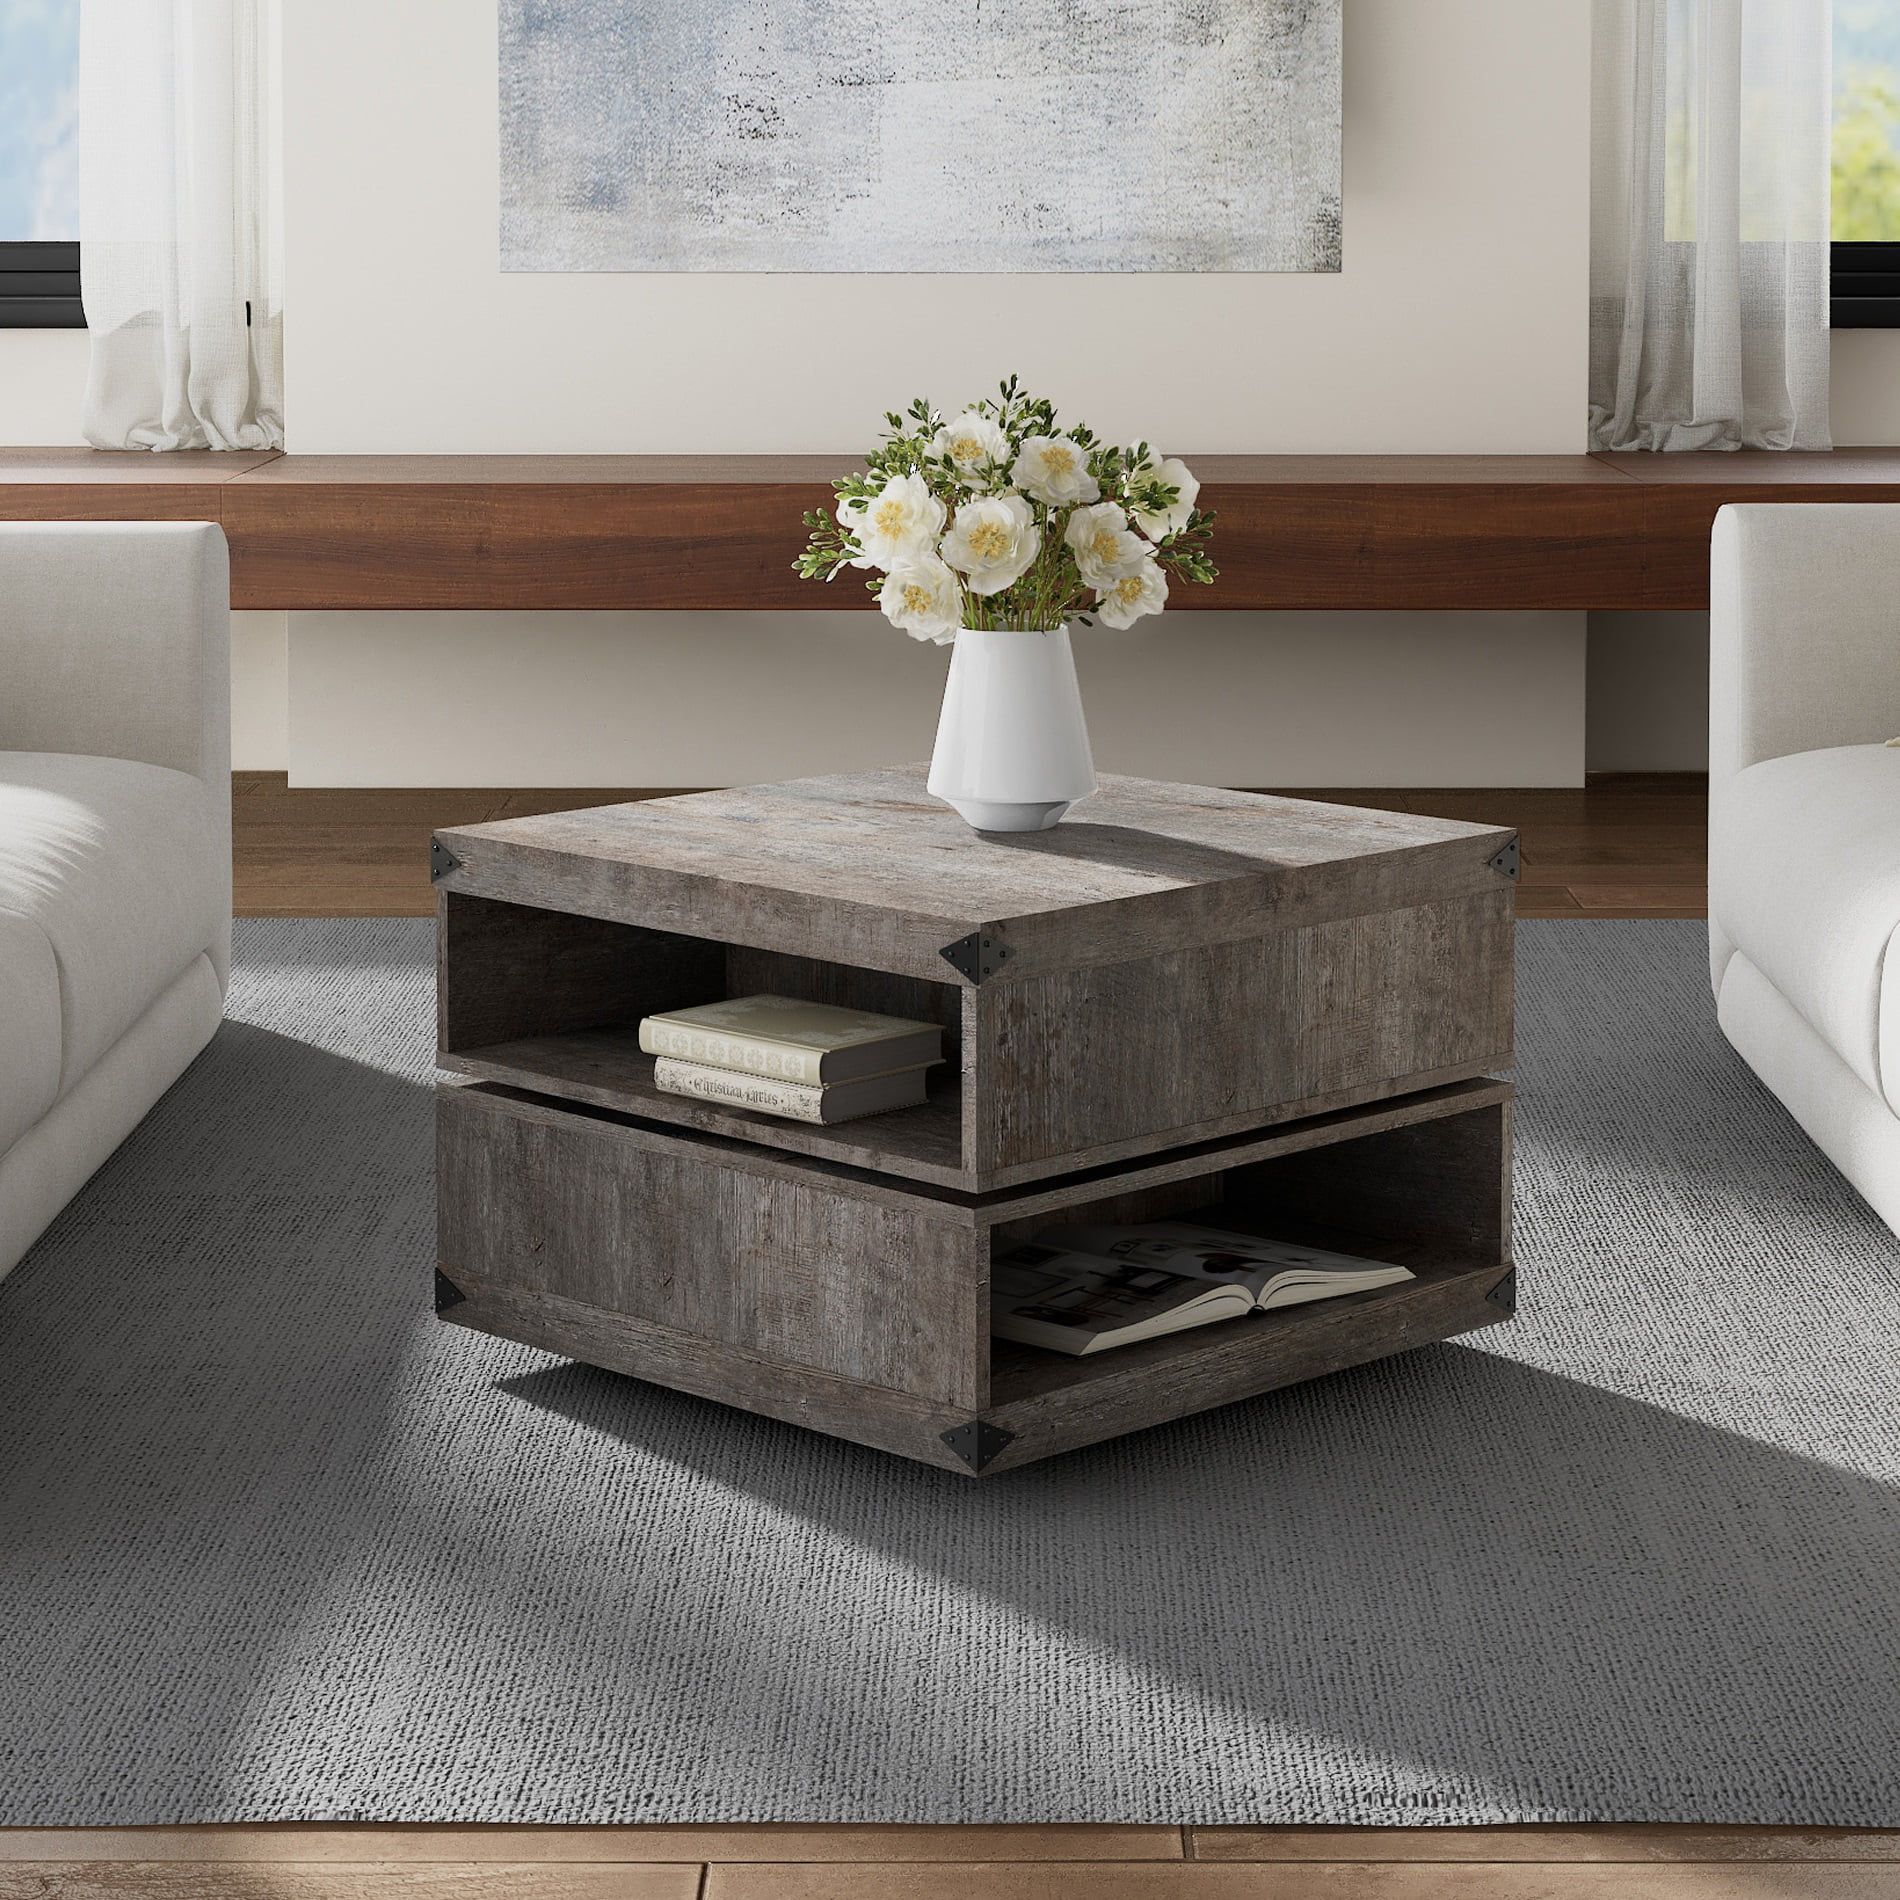 Wood Rotating Coffee Table For Living Room,rustic Gray – Walmart Regarding Wood Rotating Tray Coffee Tables (View 10 of 20)